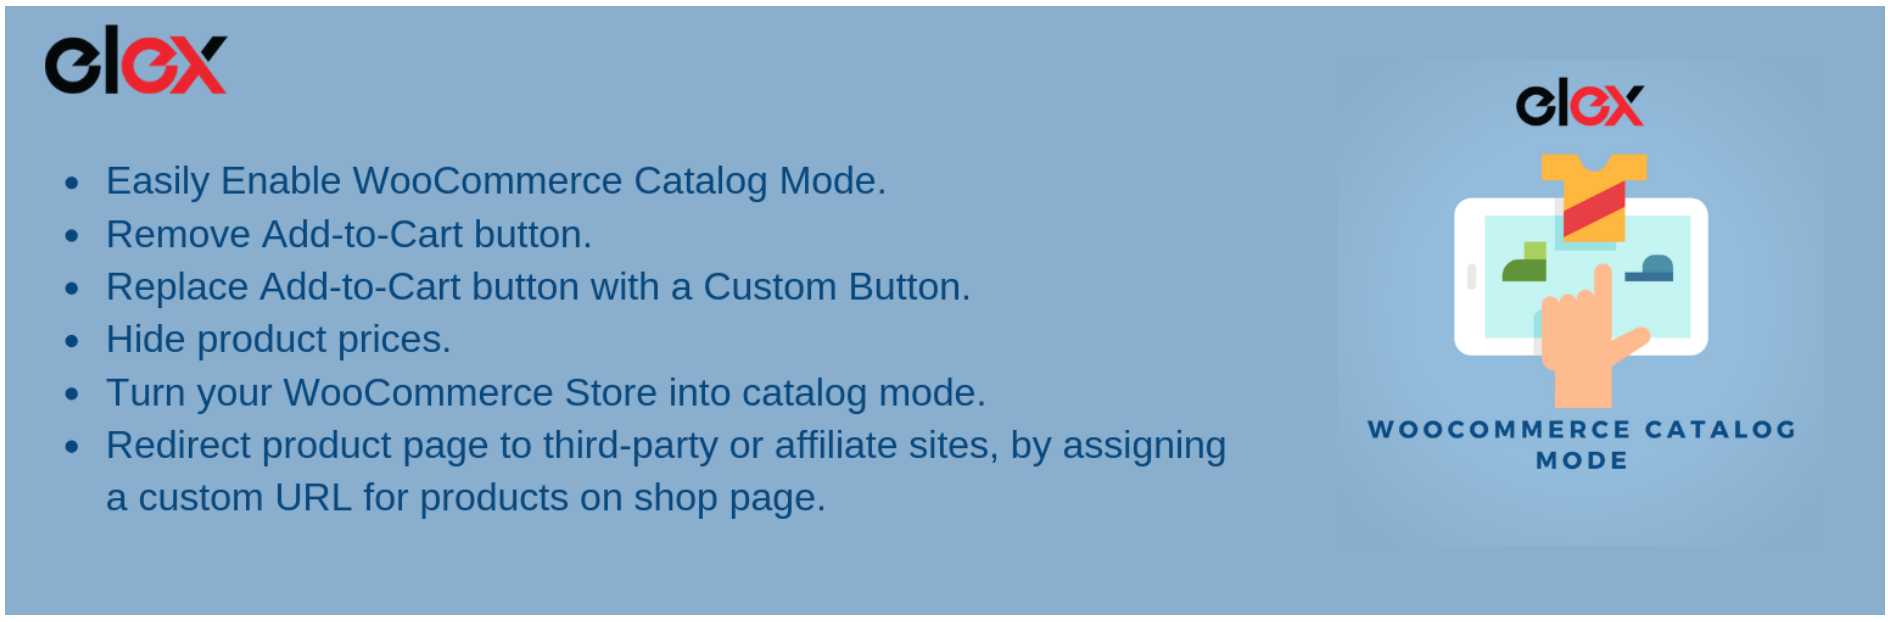 ELEX WooCommerce Catalog Mode Wholesale and Role-based pricing (Free)